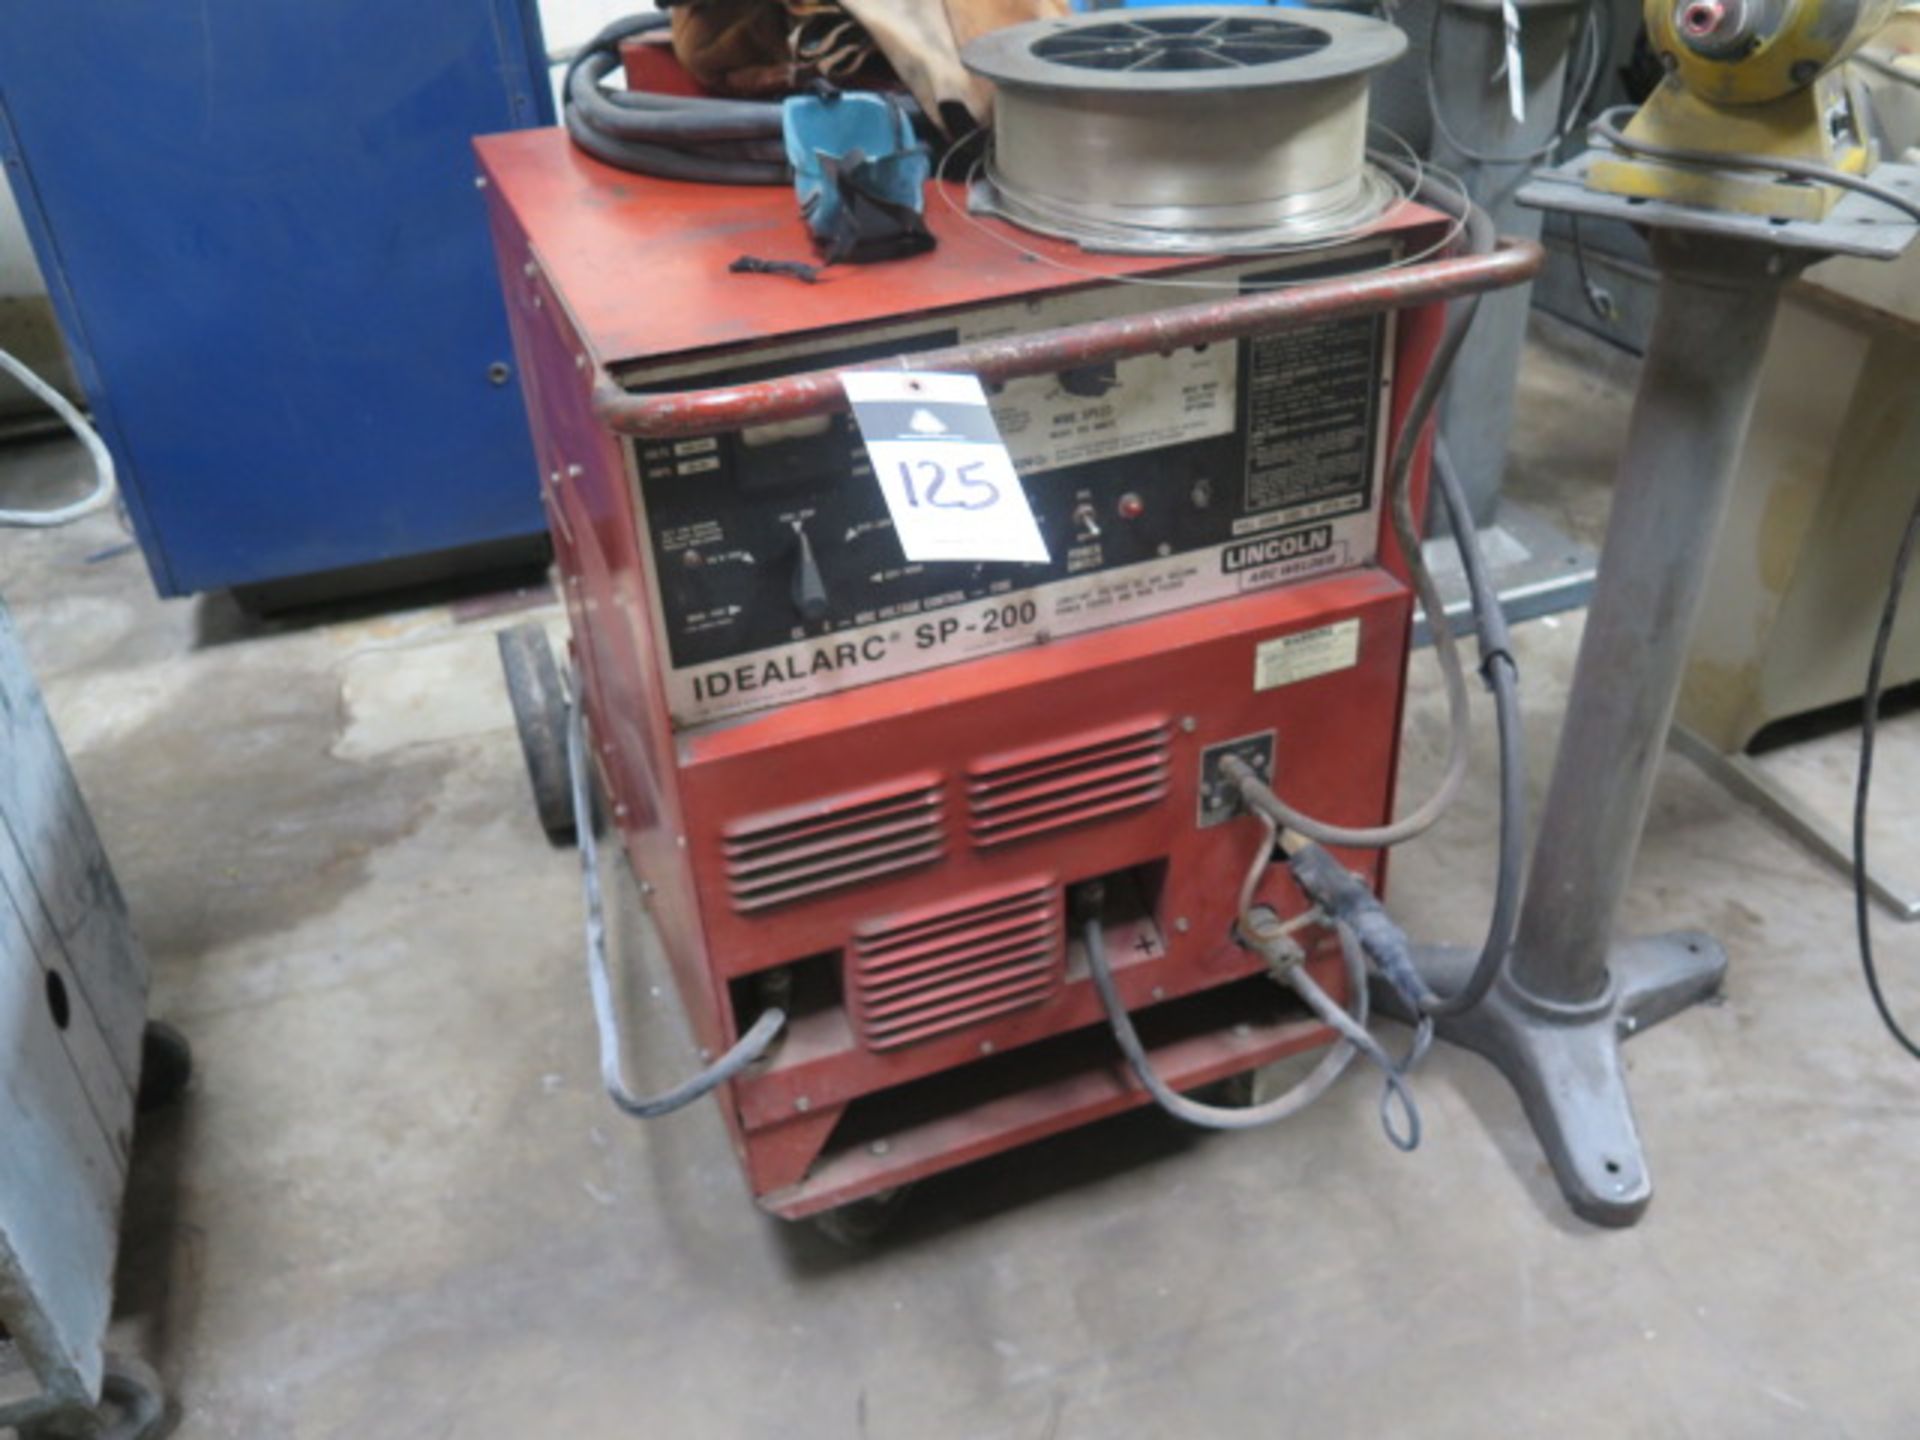 Lincoln Idealarc SP-200 CV-DC Arc Welding Power Source and Wire Feeder s/n AC-572263